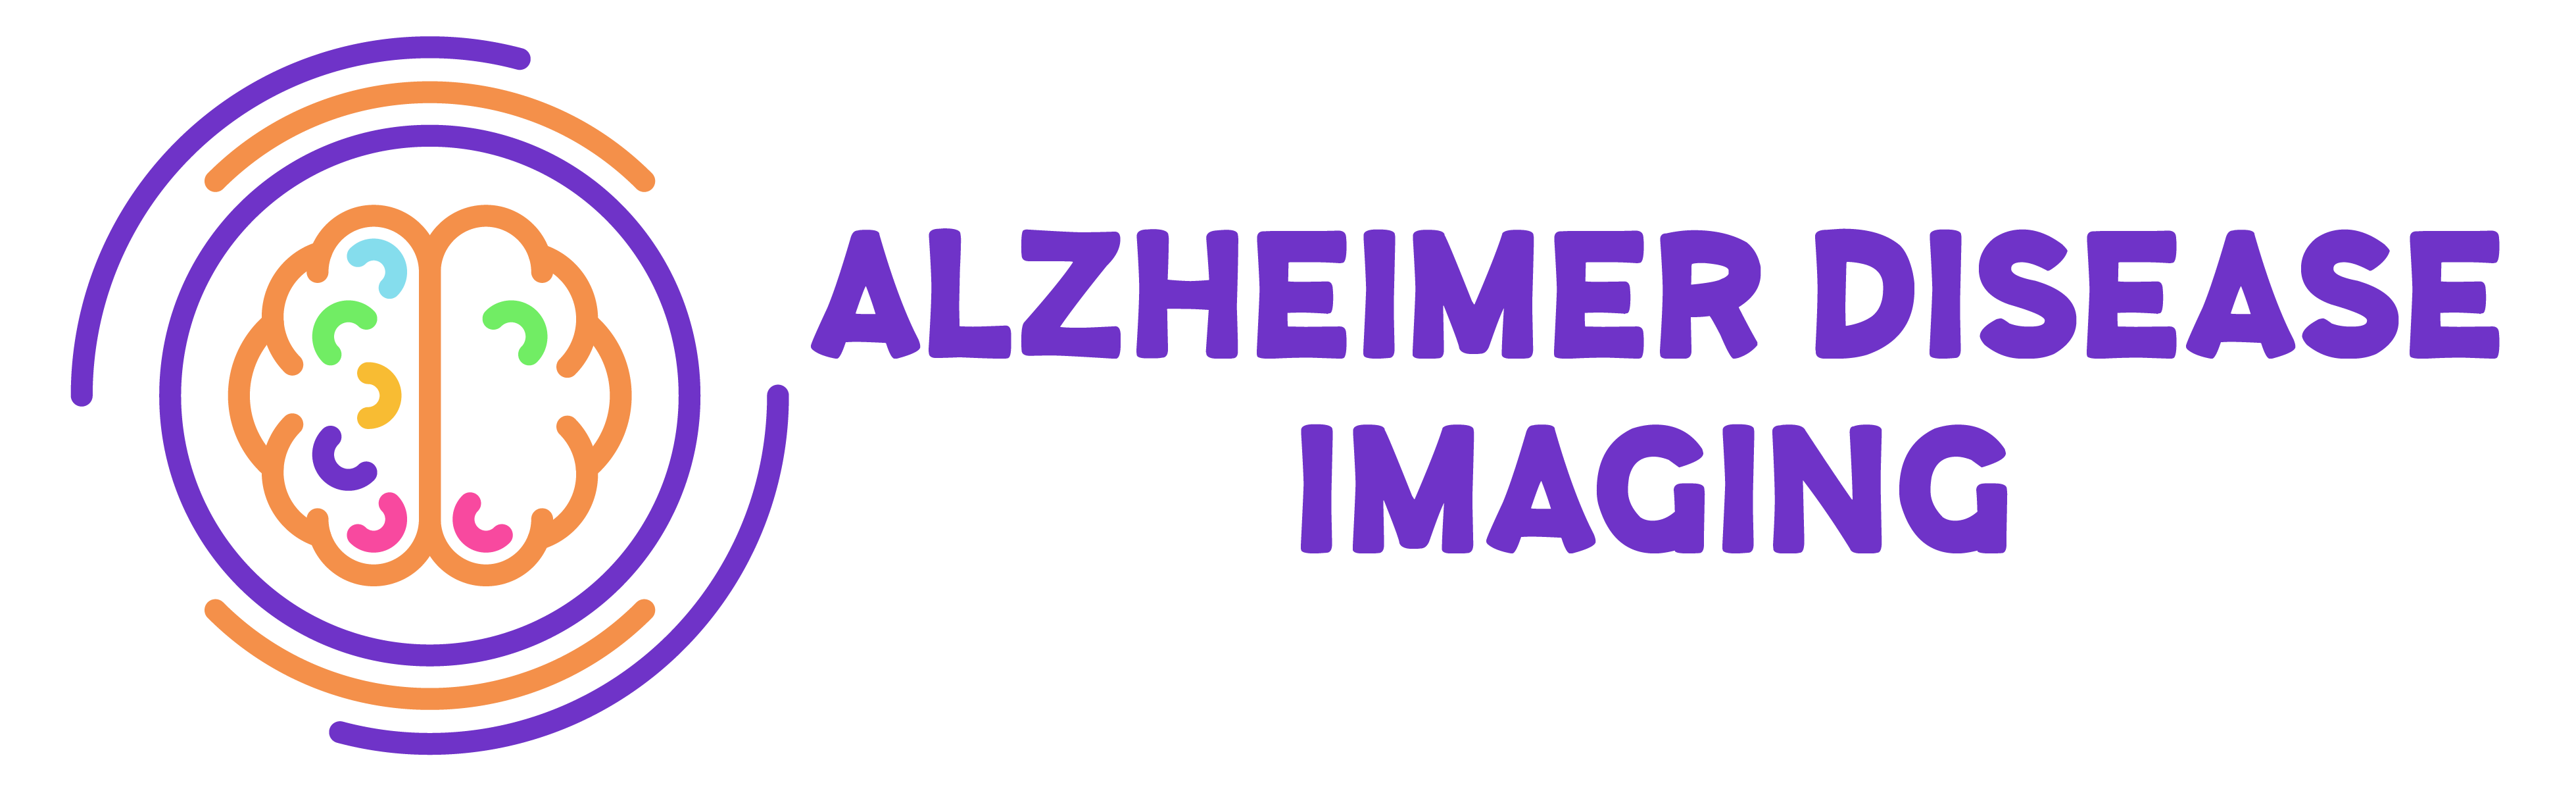 Alzheimer Disease Imaging Southern Maryland